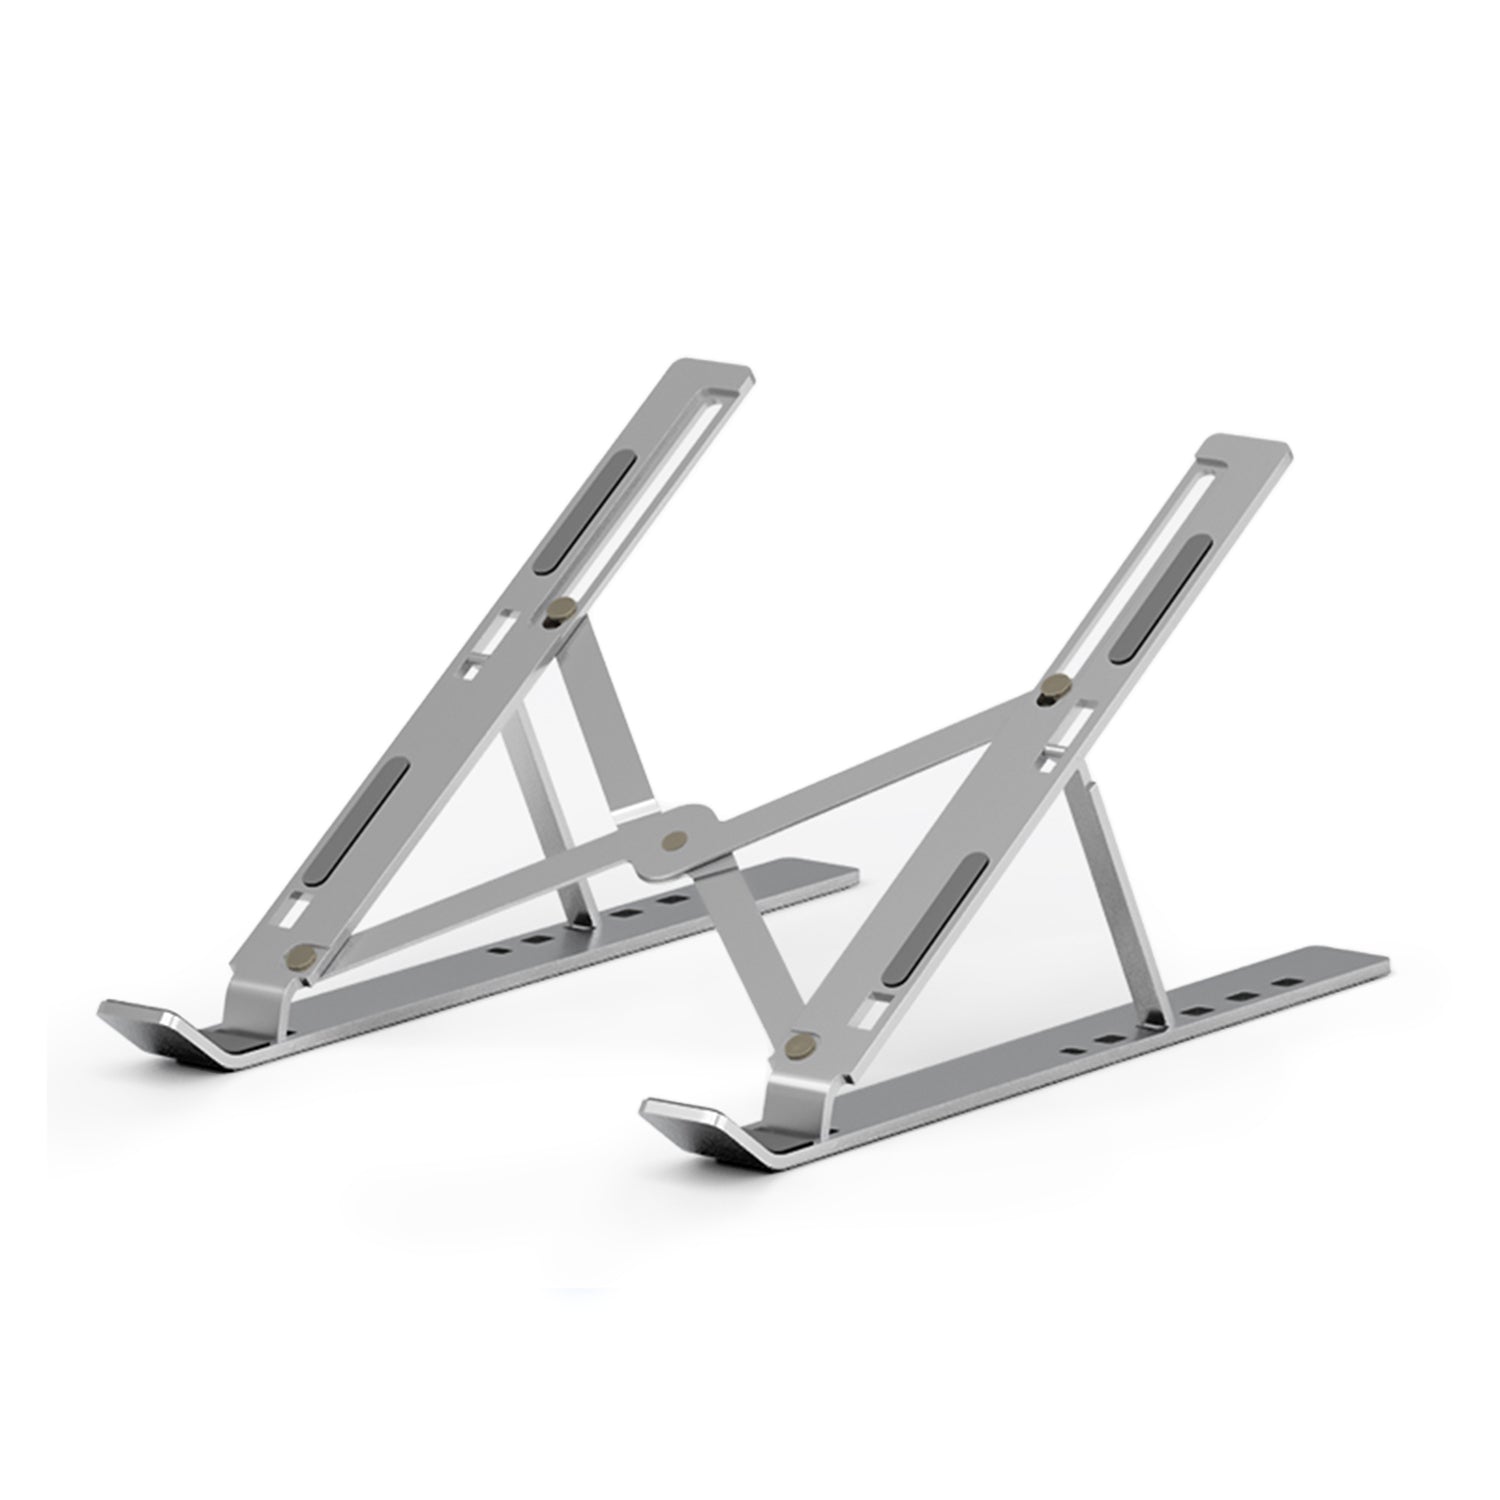 Aluminum Alloy Laptop Stand With Adjustable Height, Rotatable And Foldable Notebook Holder With Heat Dissipation, Silver